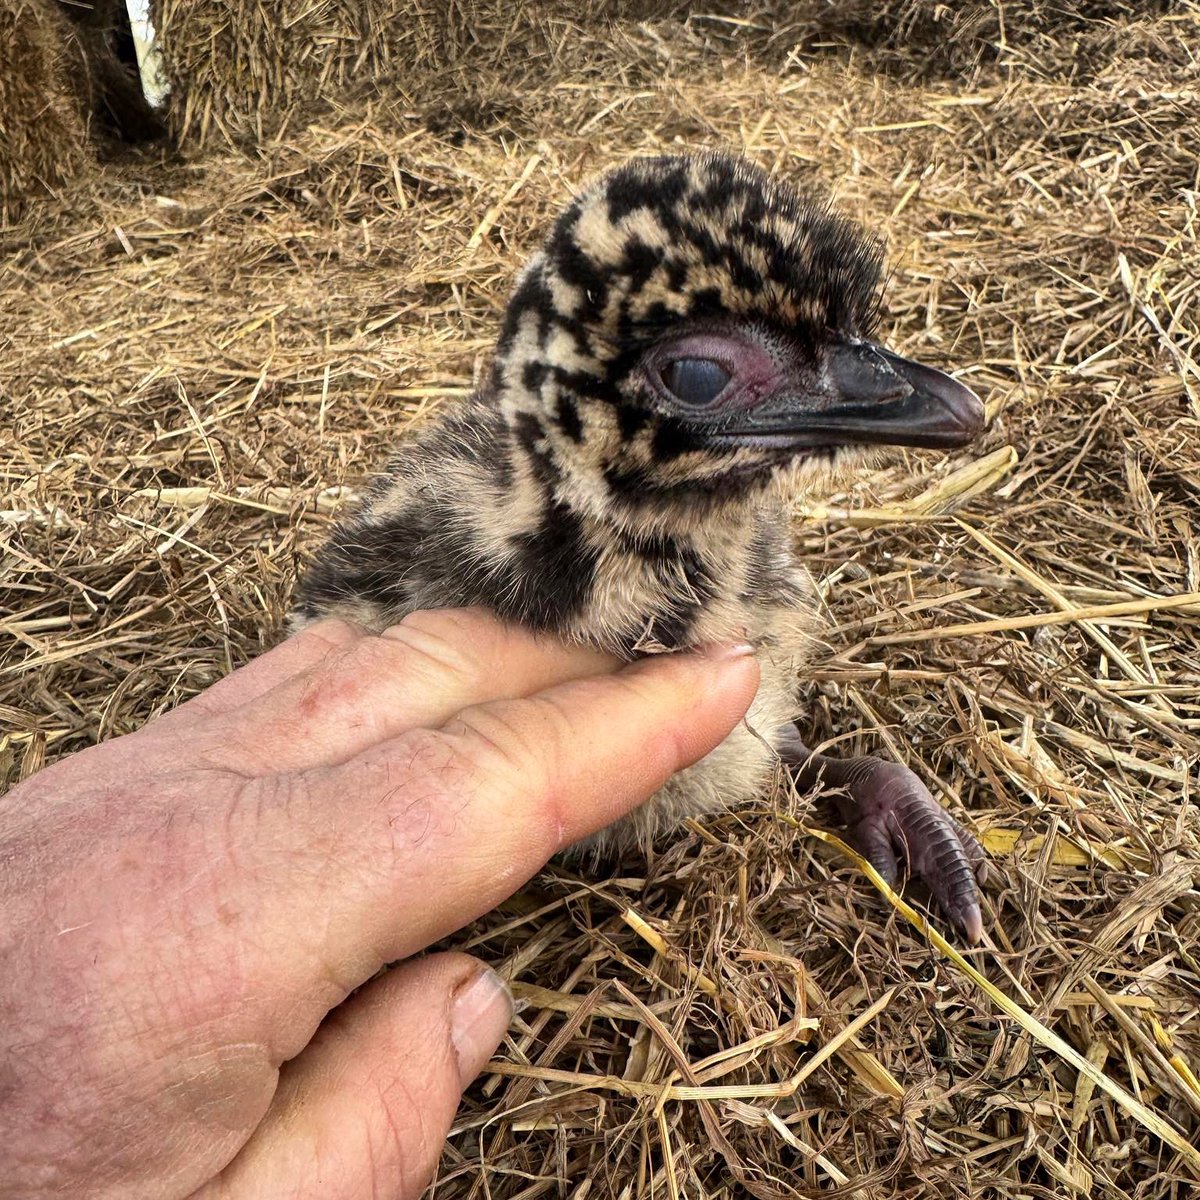 Egg-citing Easter news just in. We have an Emu chick, keep a look out on @caenhillcc for all the latest updates from Chris and Caroline. We’re so excited. #caenhillcc #emuchick #babyemu #eastersurprise #newsjustin